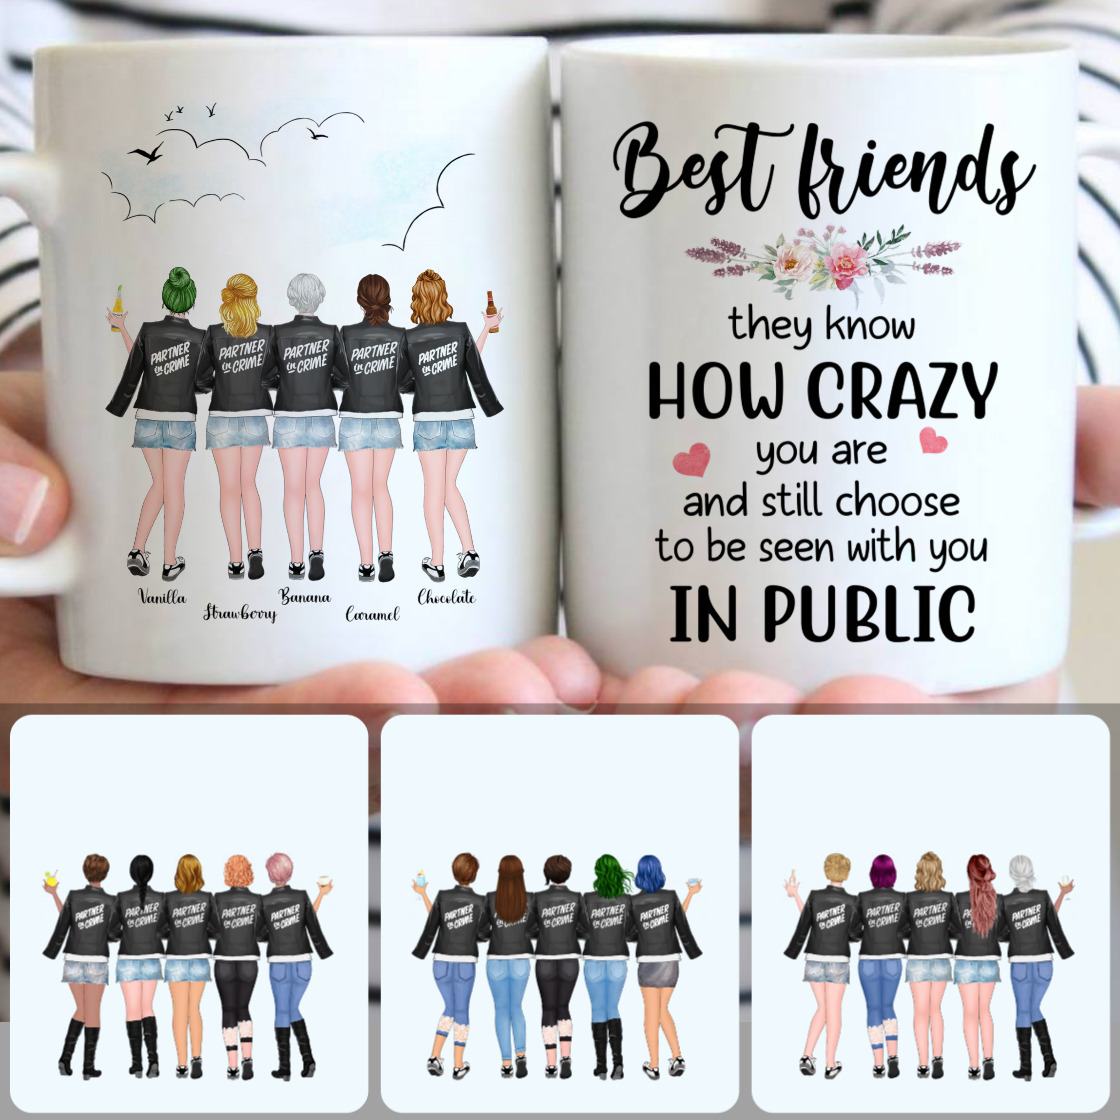 Personalized Mug, Surprise Birthday Gifts, 5 Best Friends - Partner In Cream Customized Coffee Mug With Names